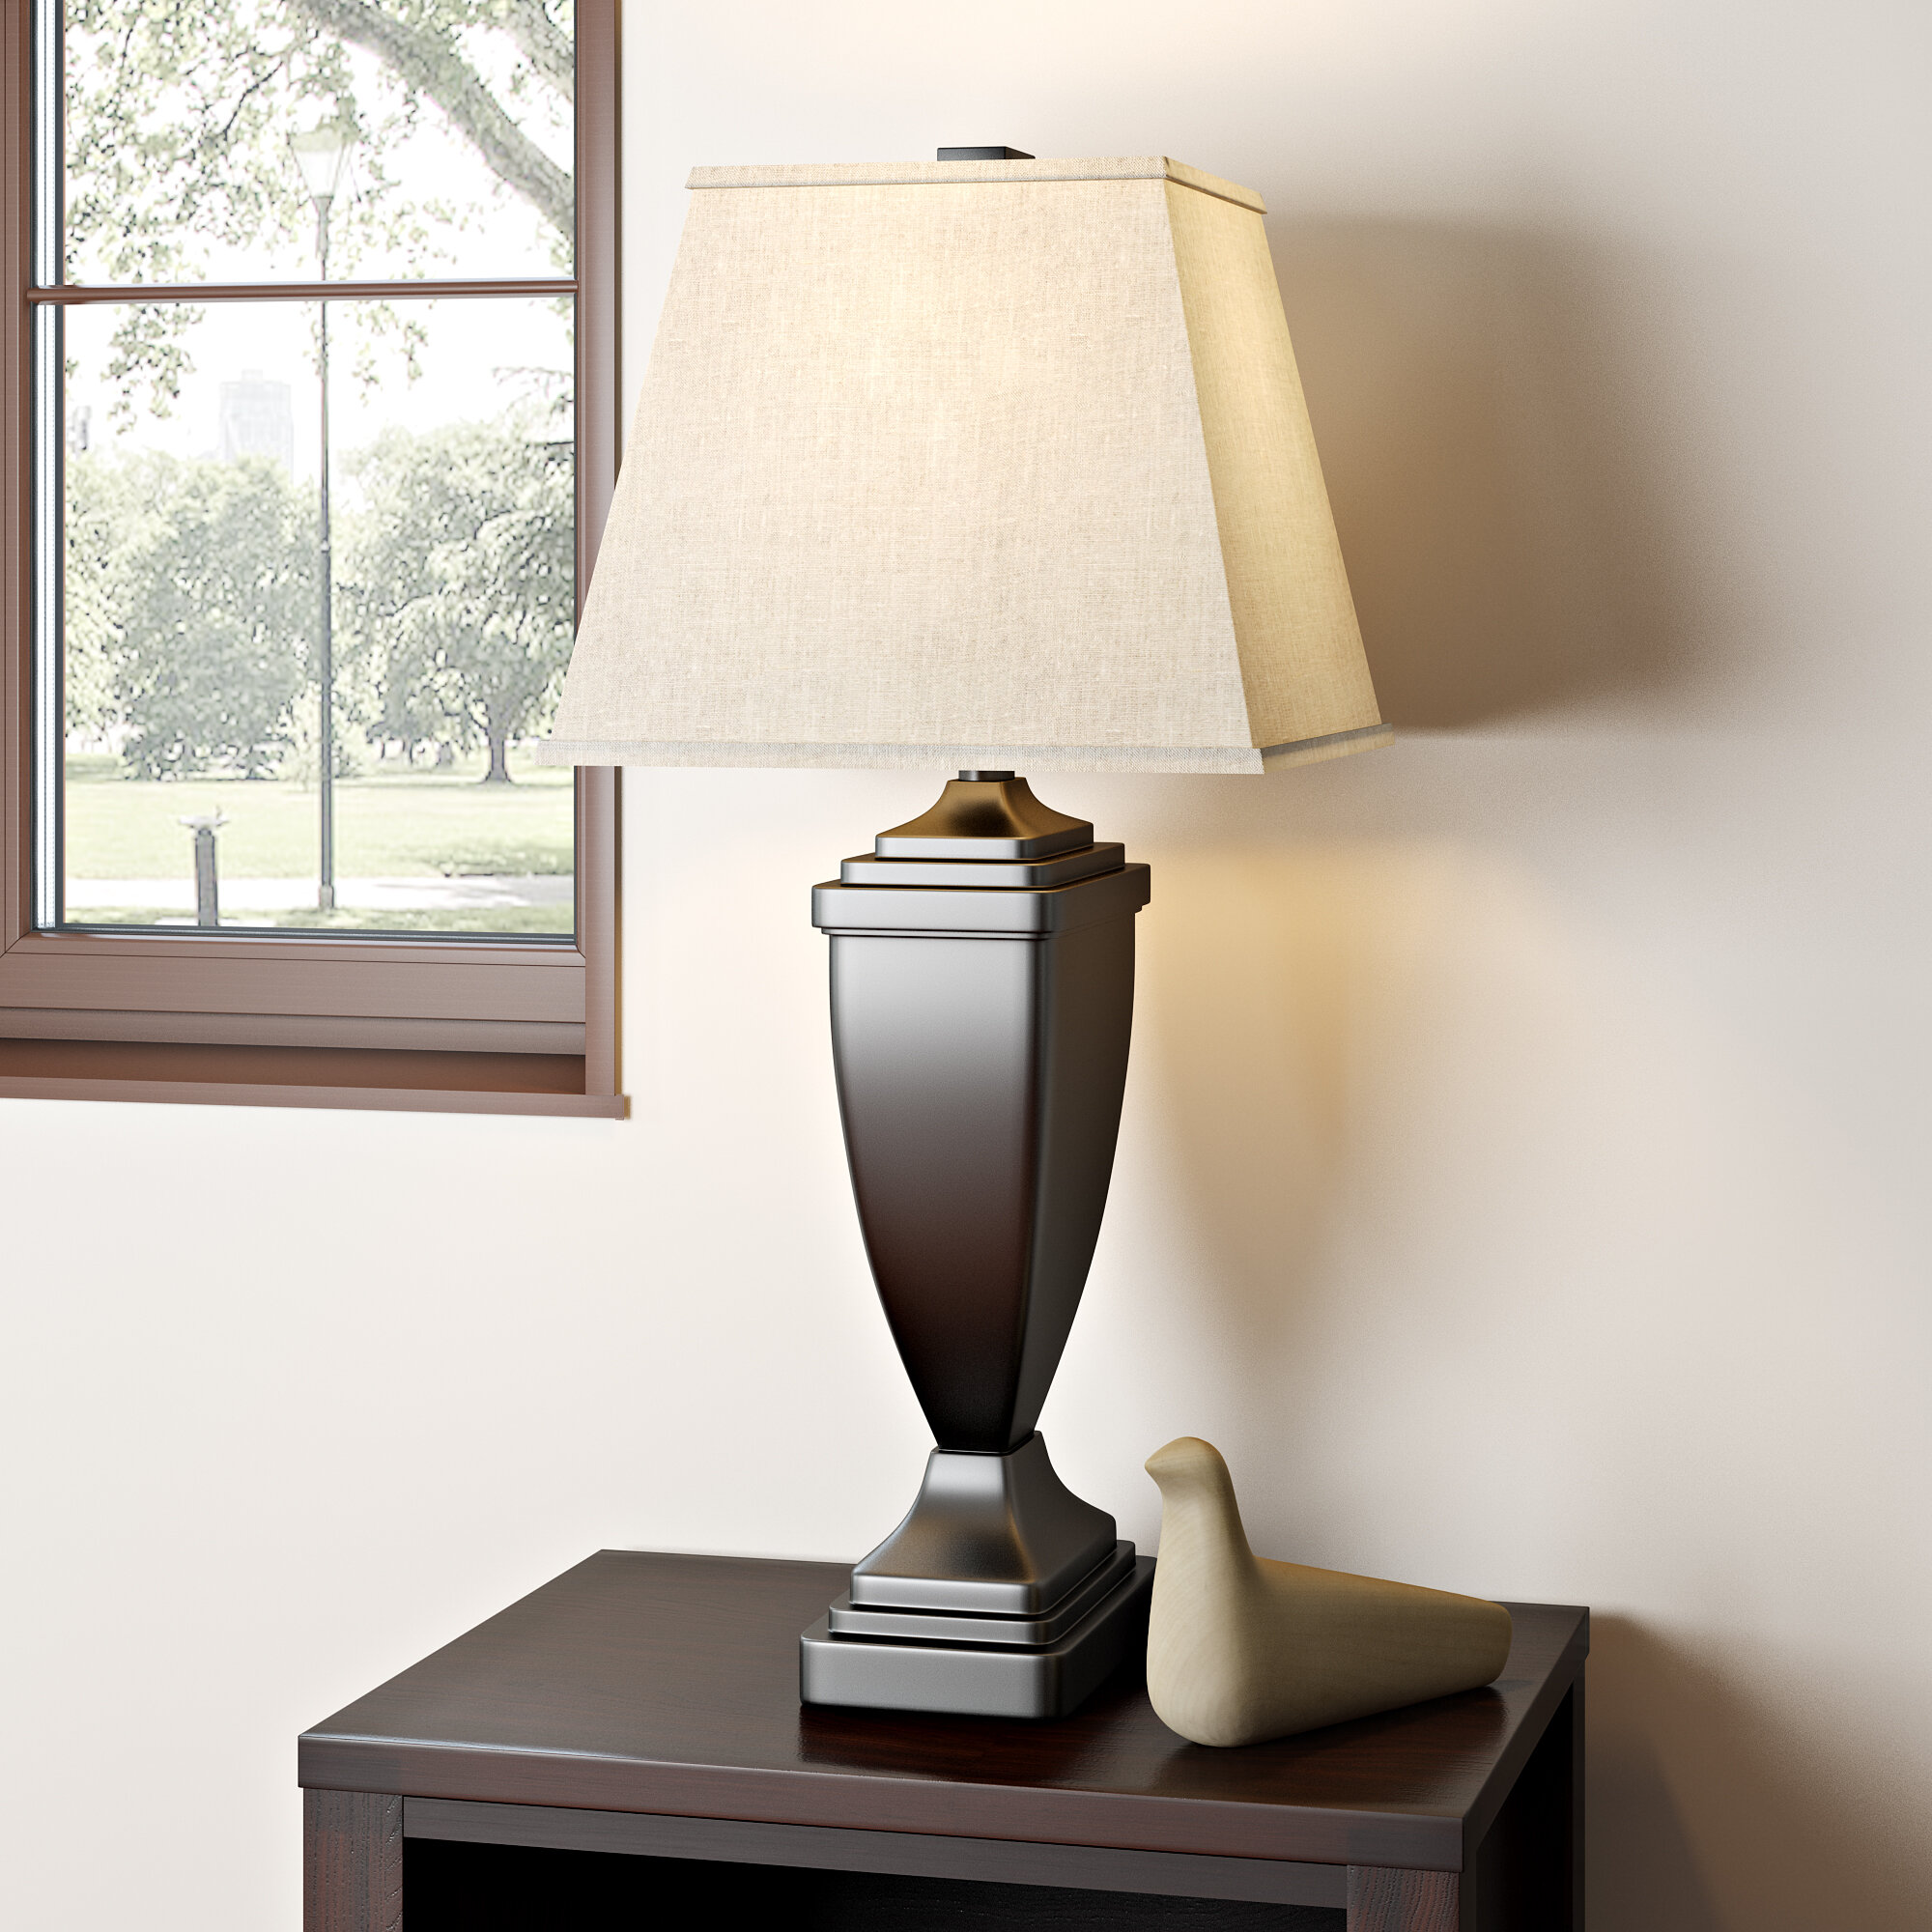 tall table lamp sets